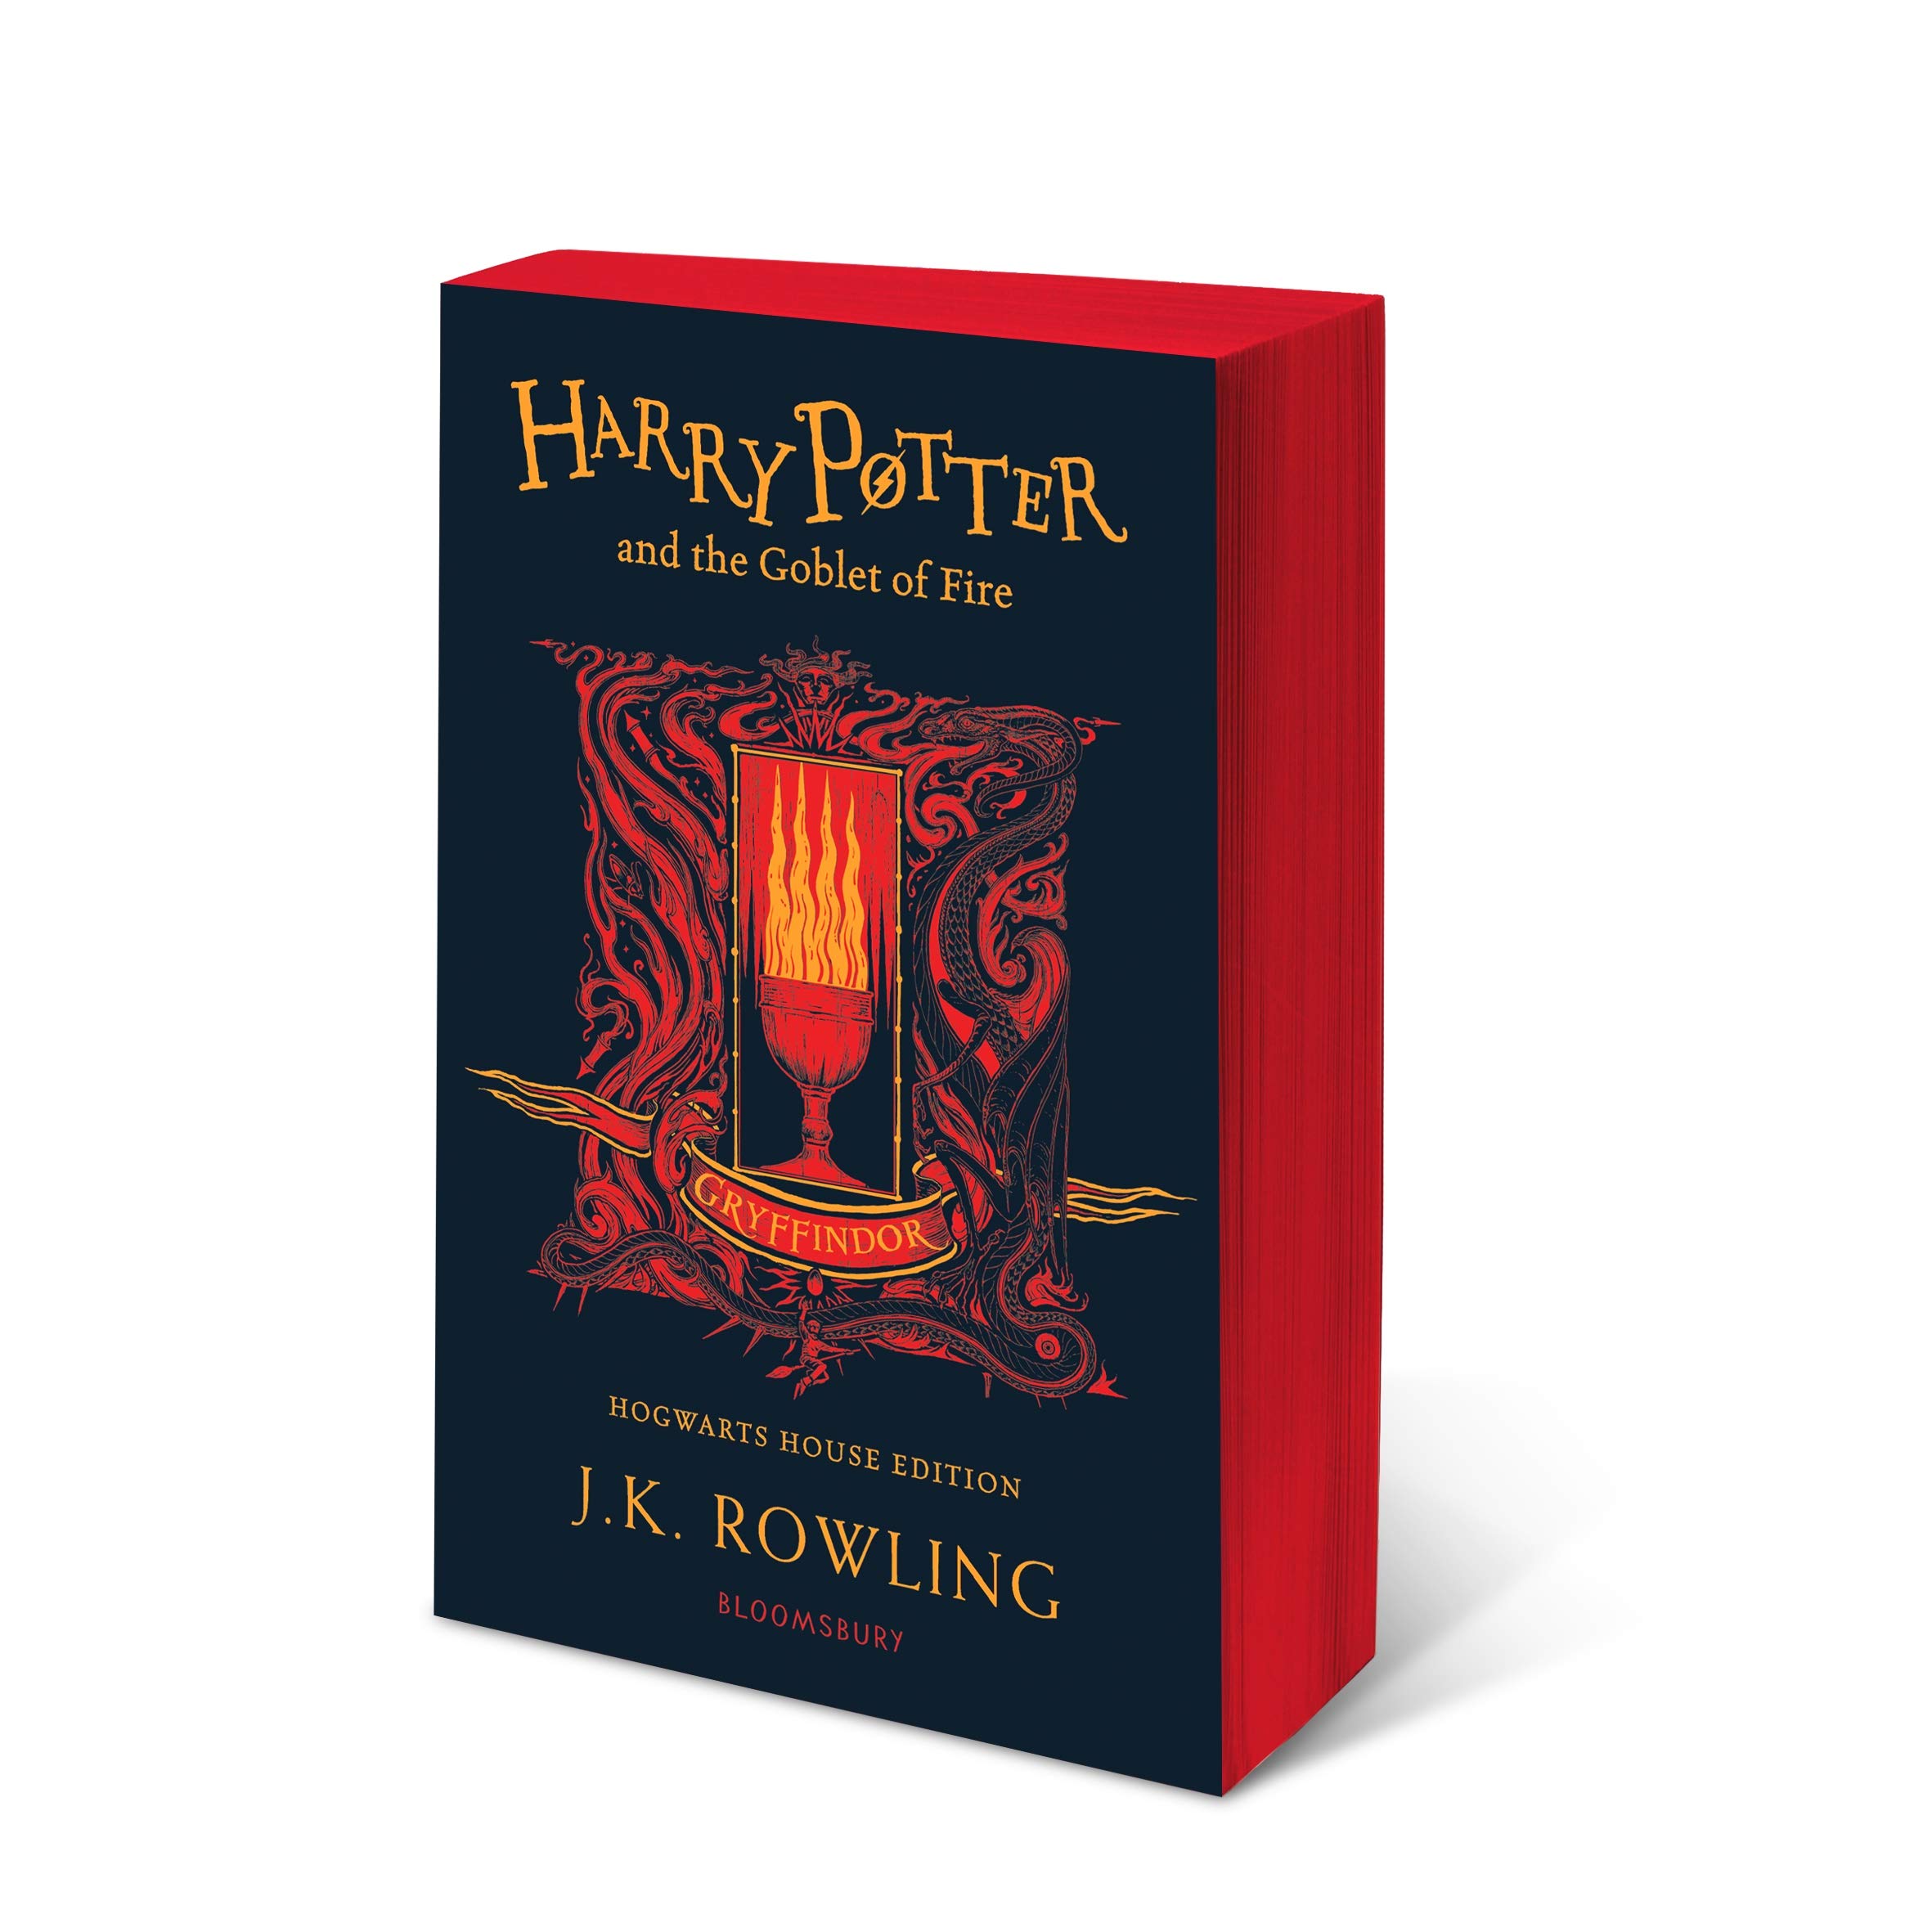 Harry Potter and the Goblet of Fire | J.K. Rowling